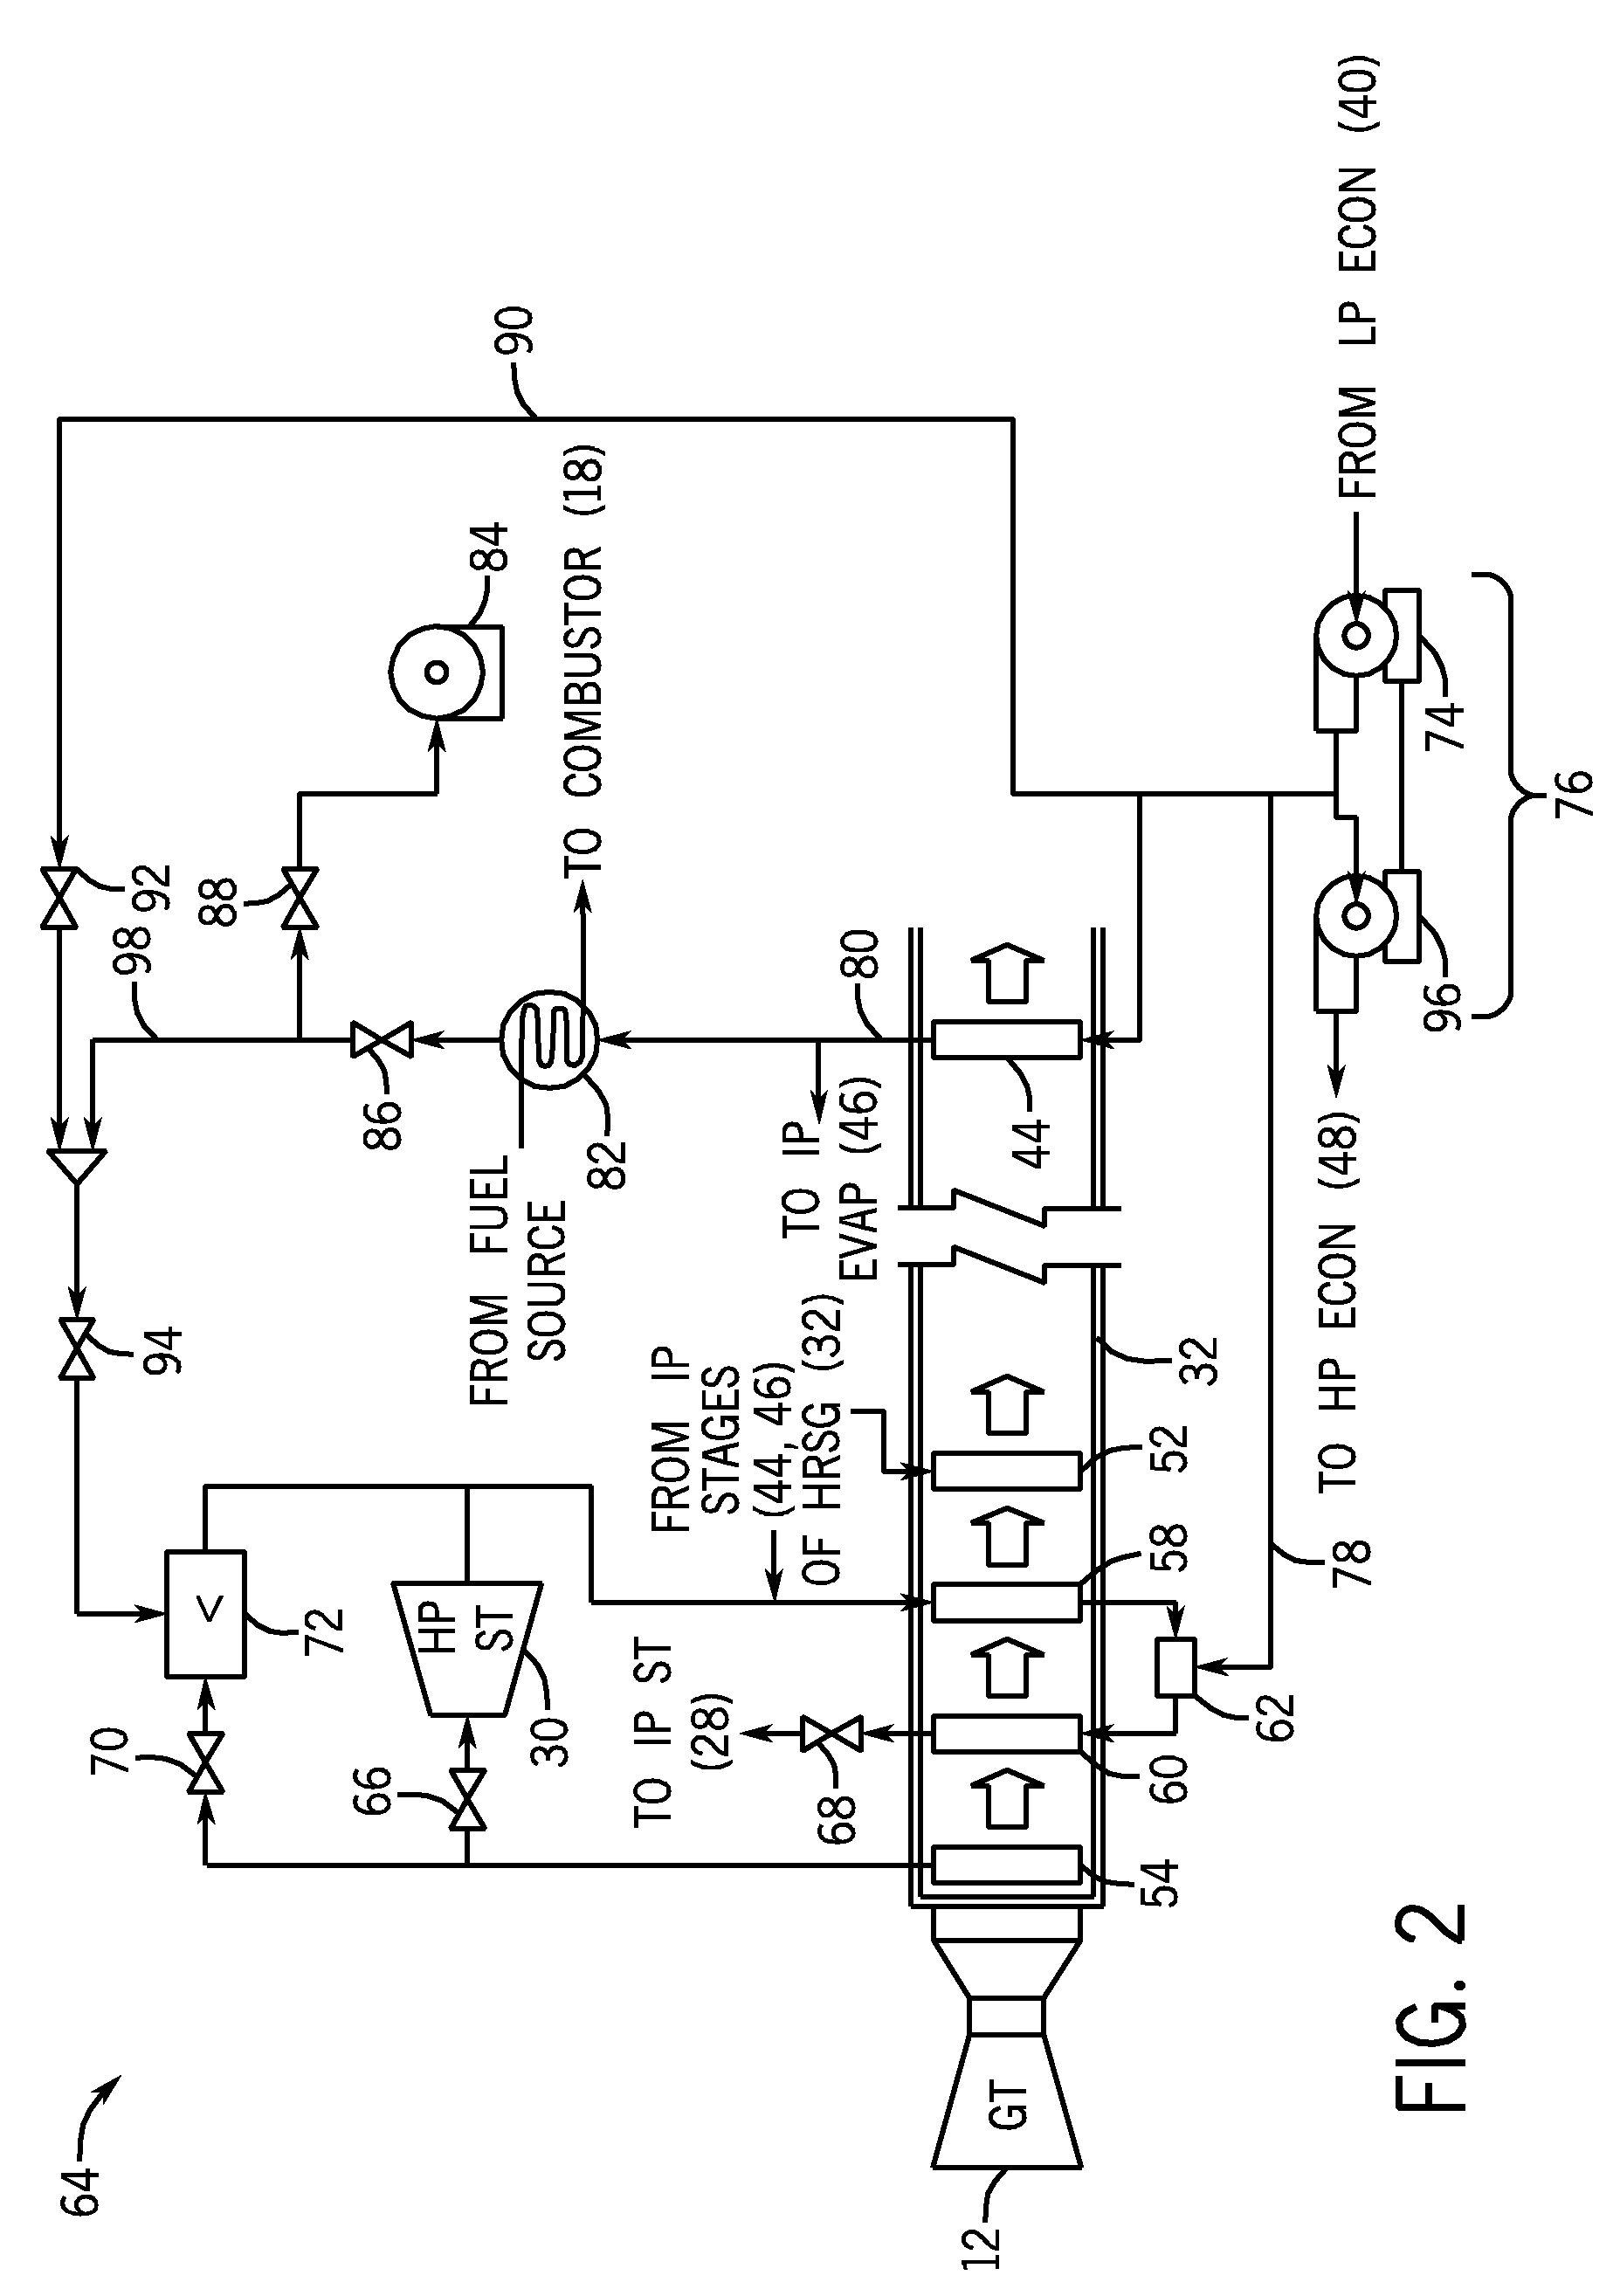 Apparatus for steam attemperation using fuel gas heater water discharge to reduce feedwater pump size